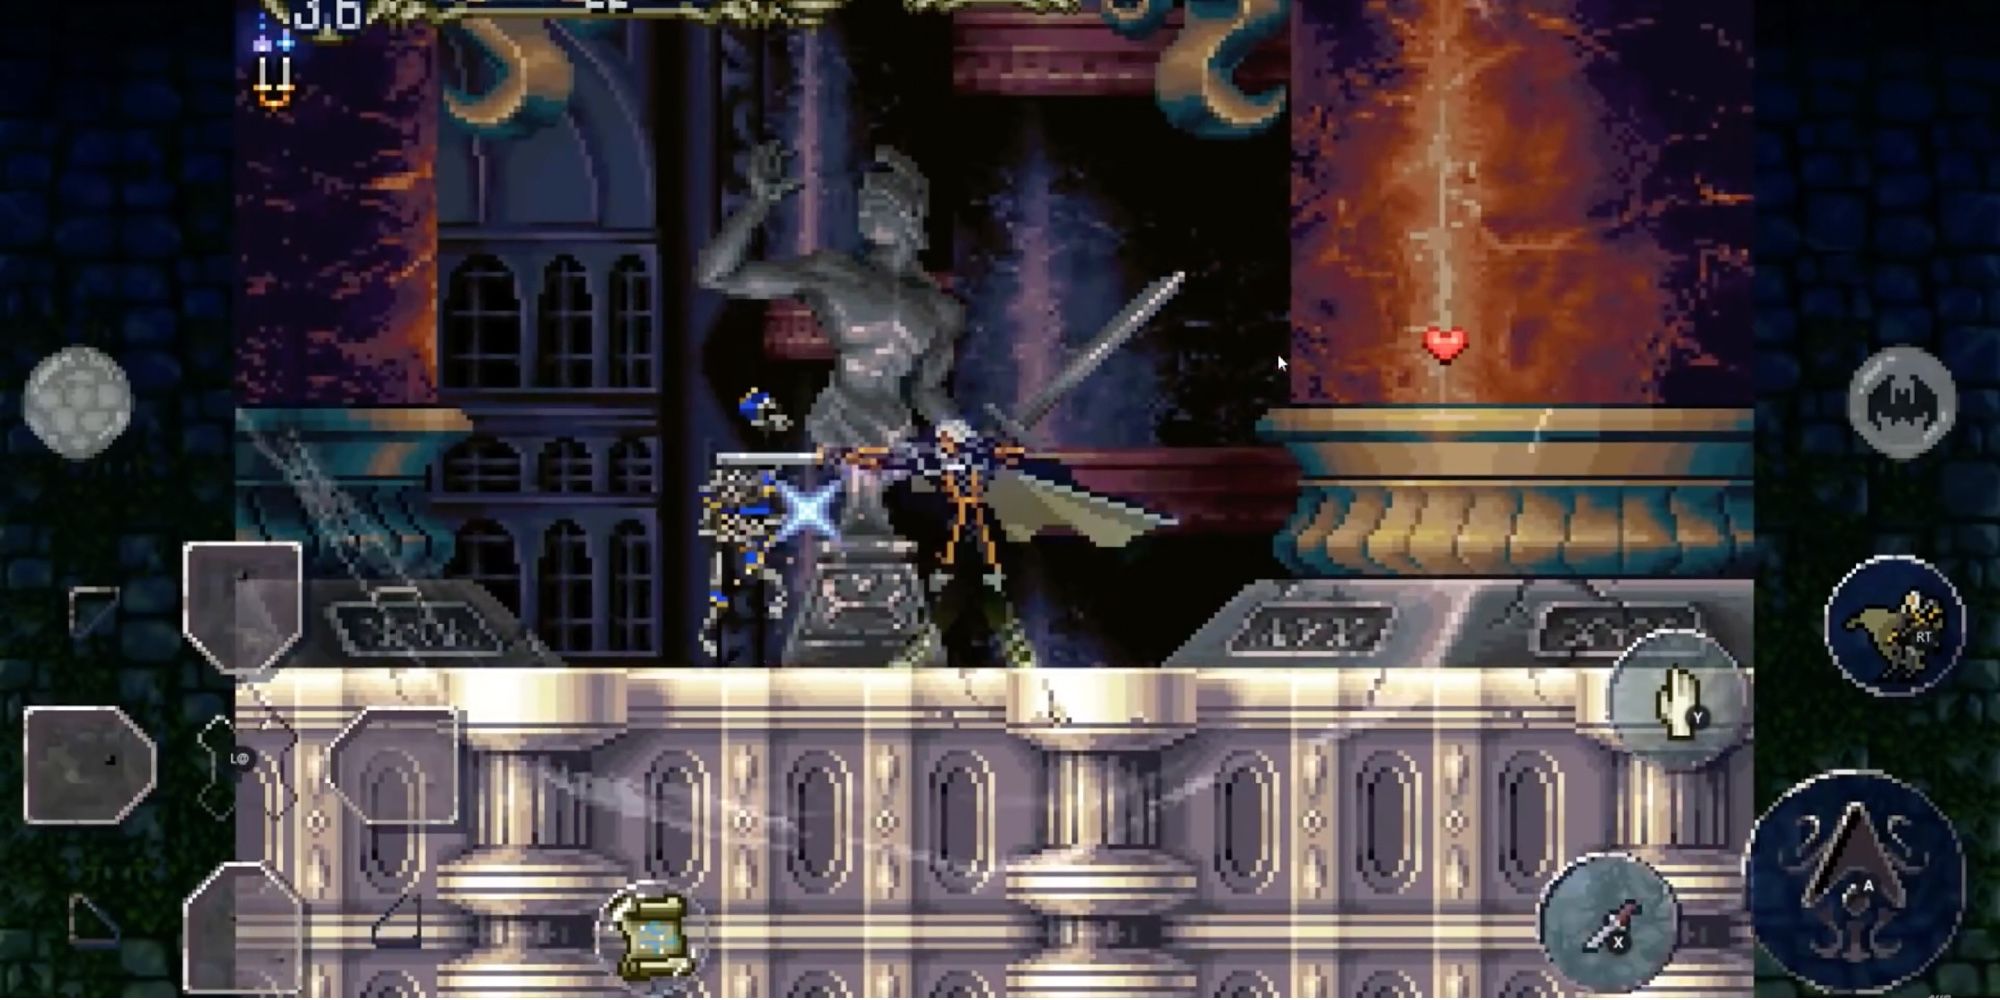 Mobile Anime Games - Alucard strikes enemy with his sword